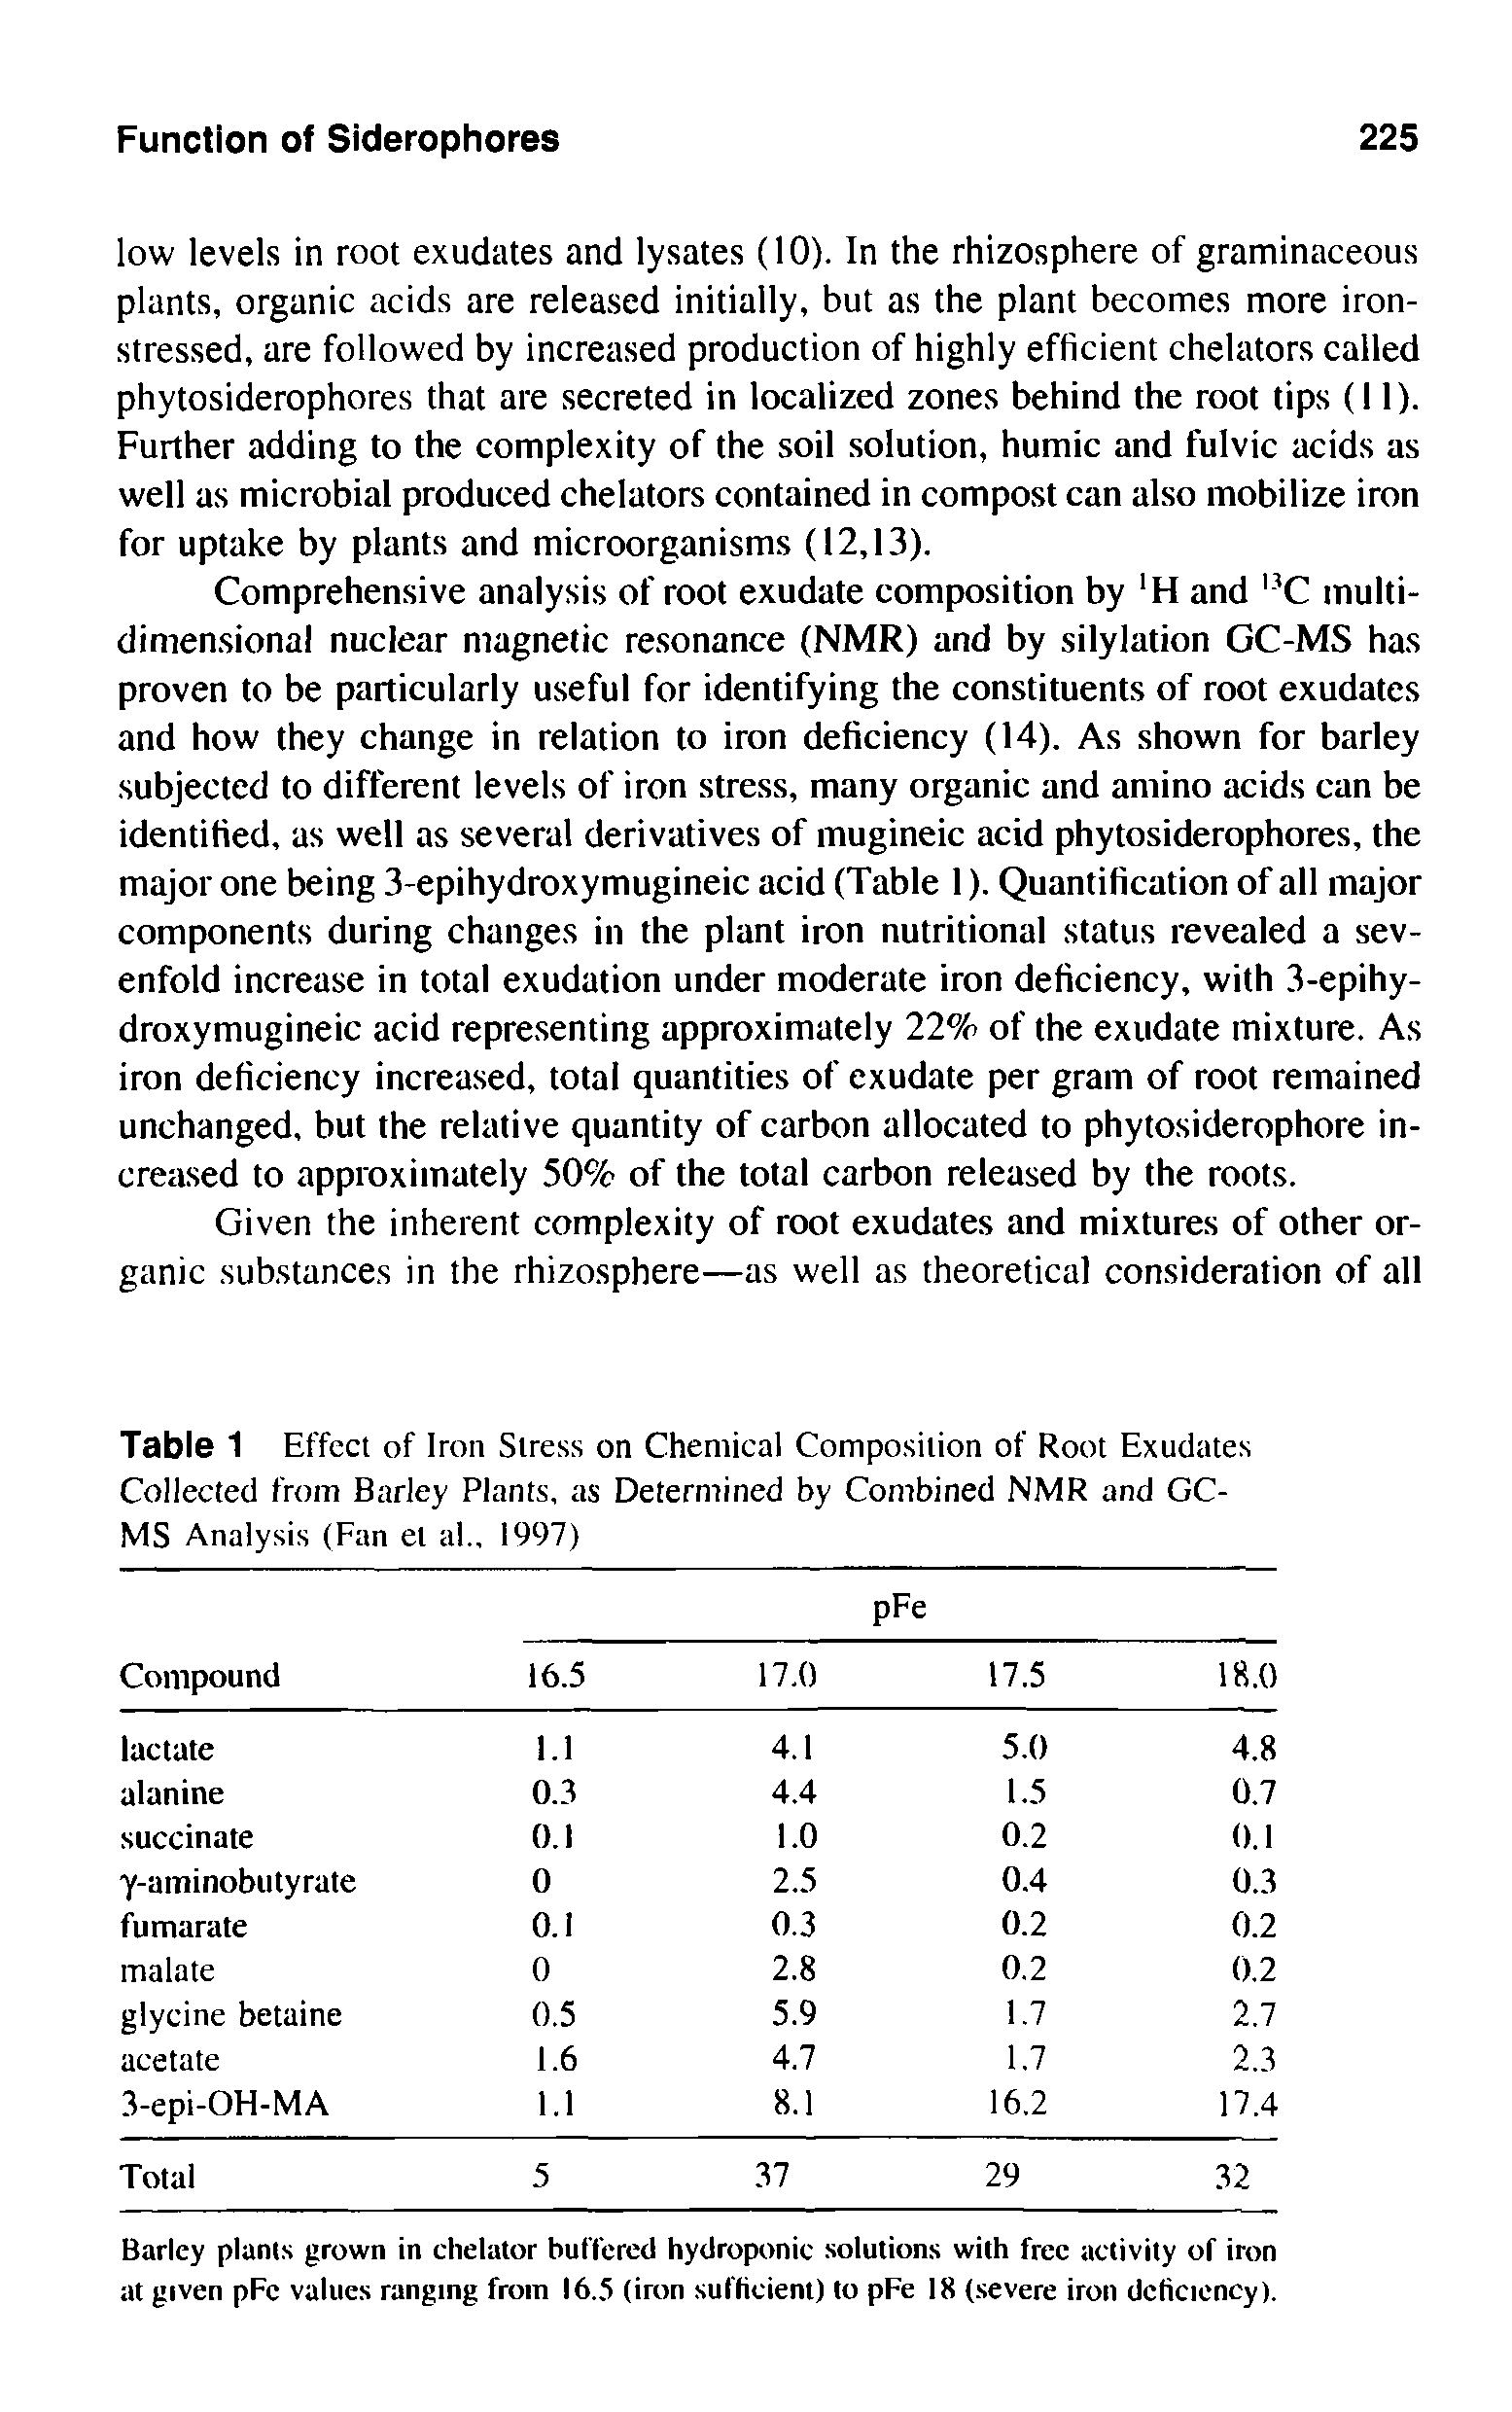 Table 1 Effect of Iron Stress on Chemical Composition of Root Exudates Collected from Barley Plants, as Determined by Combined NMR and GC-MS Analysis (Fan et al., 1997)...